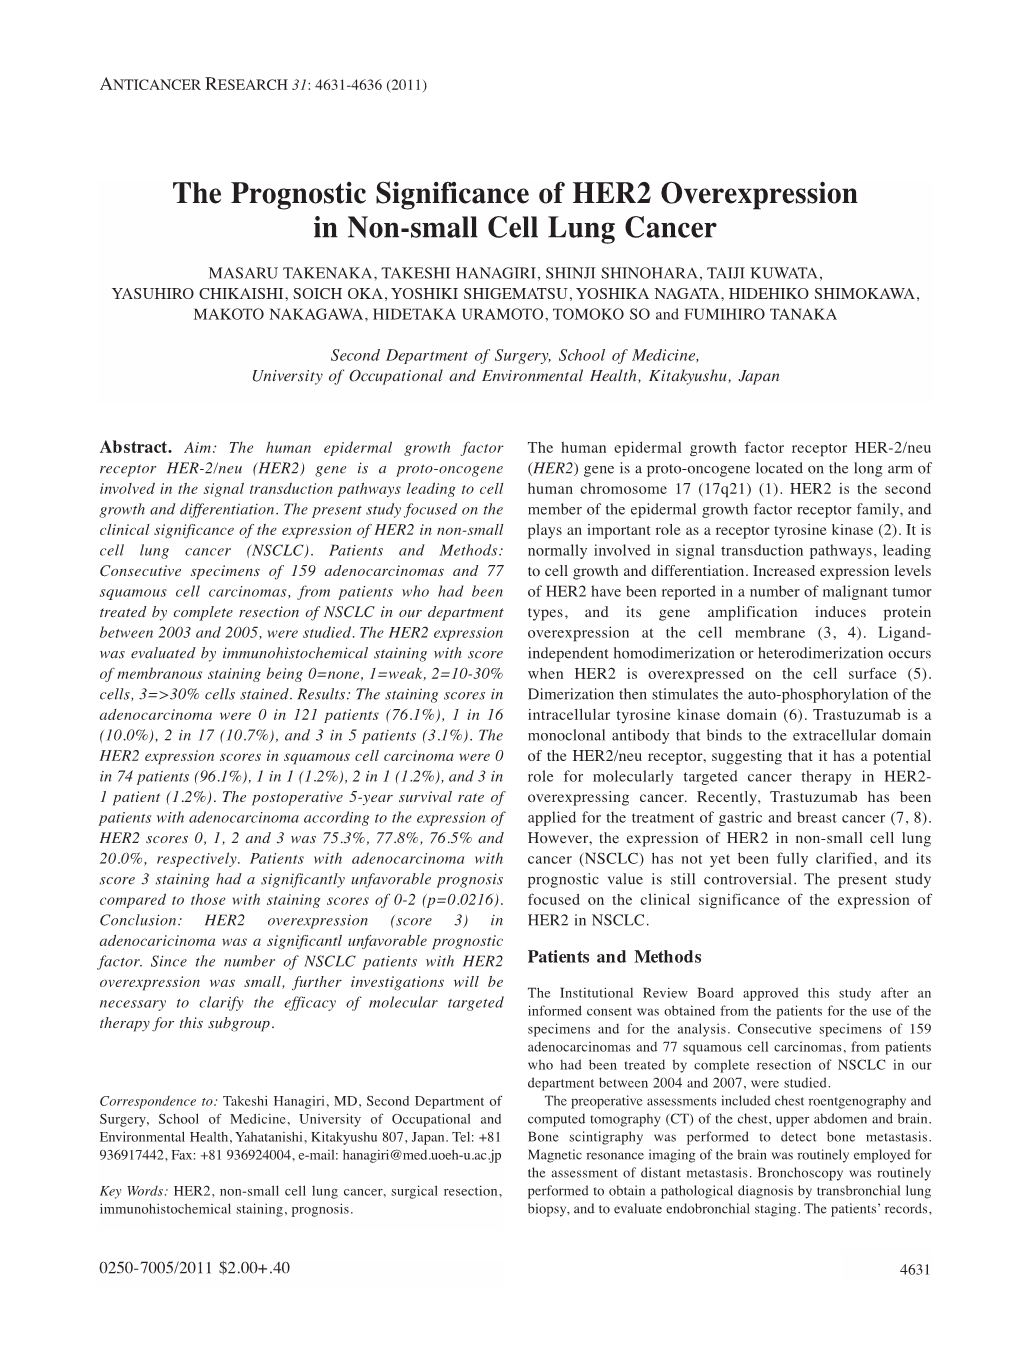 The Prognostic Significance of HER2 Overexpression in Non-Small Cell Lung Cancer